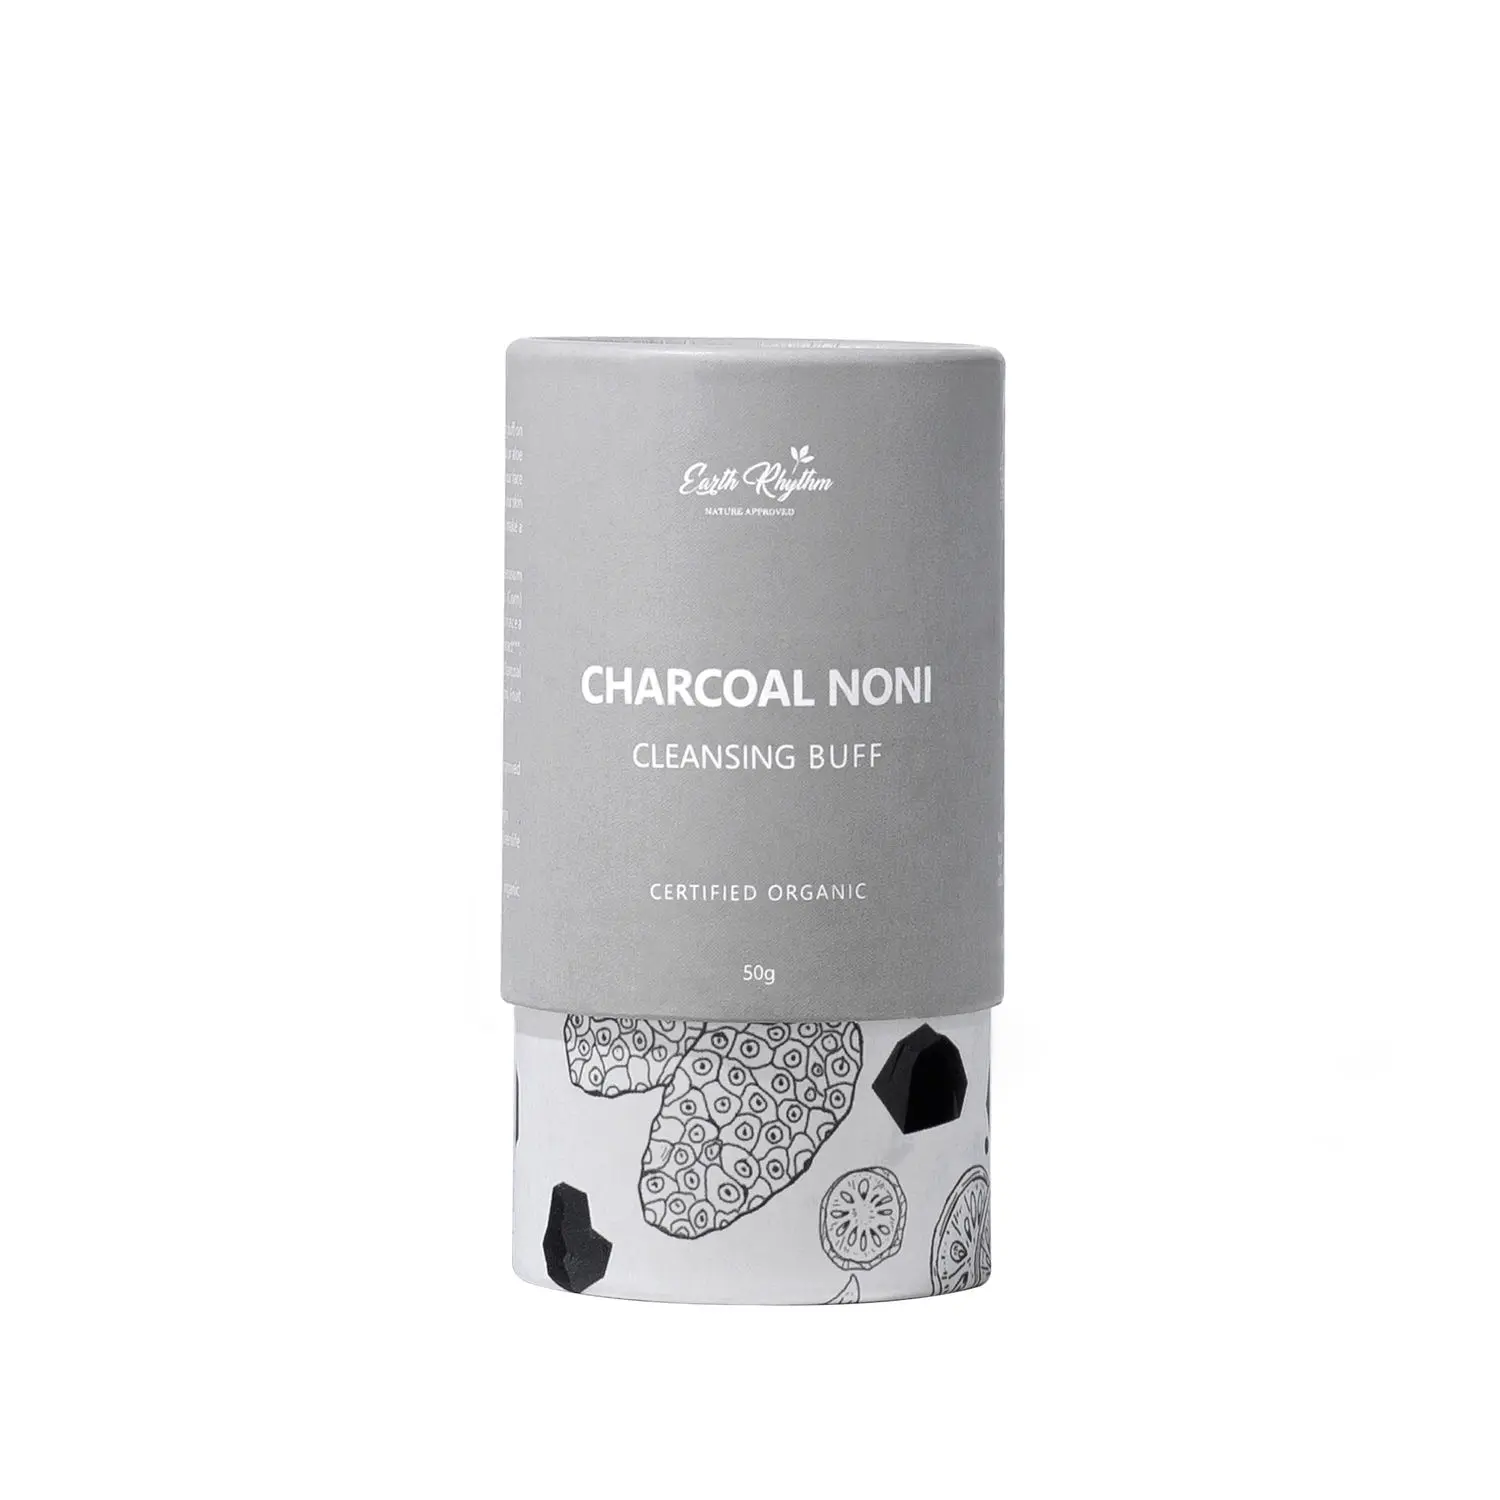 Earth Rhythm Charcoal Noni Cleansing Buff | Certified Organic | Detoxifies, Clear Pores, Absorbs Excess Oil | Men & Women - 50 G